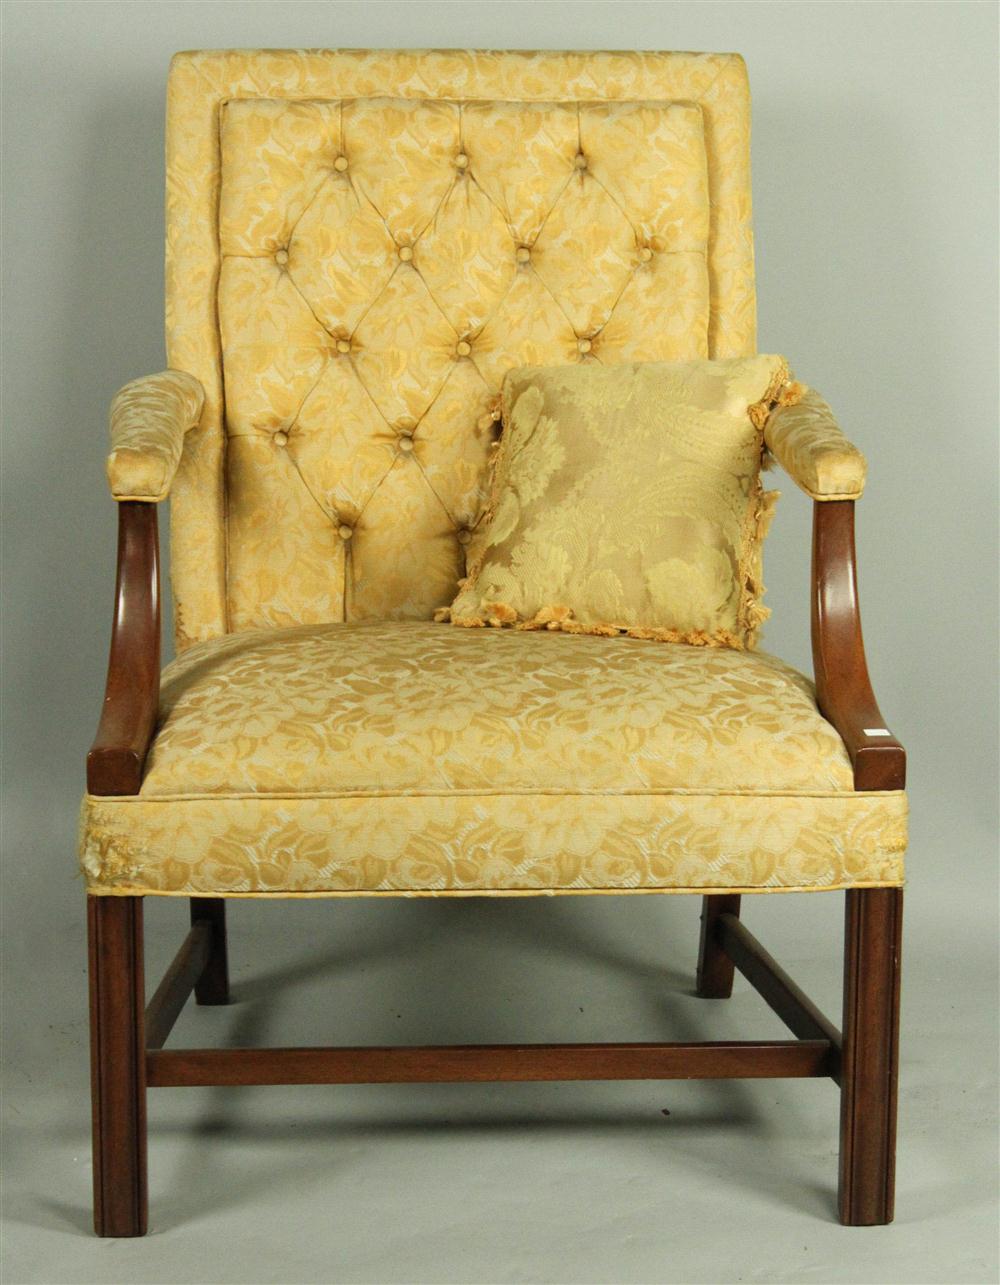 GEORGIAN STYLE OPEN ARM CHAIR WITH 1459ee